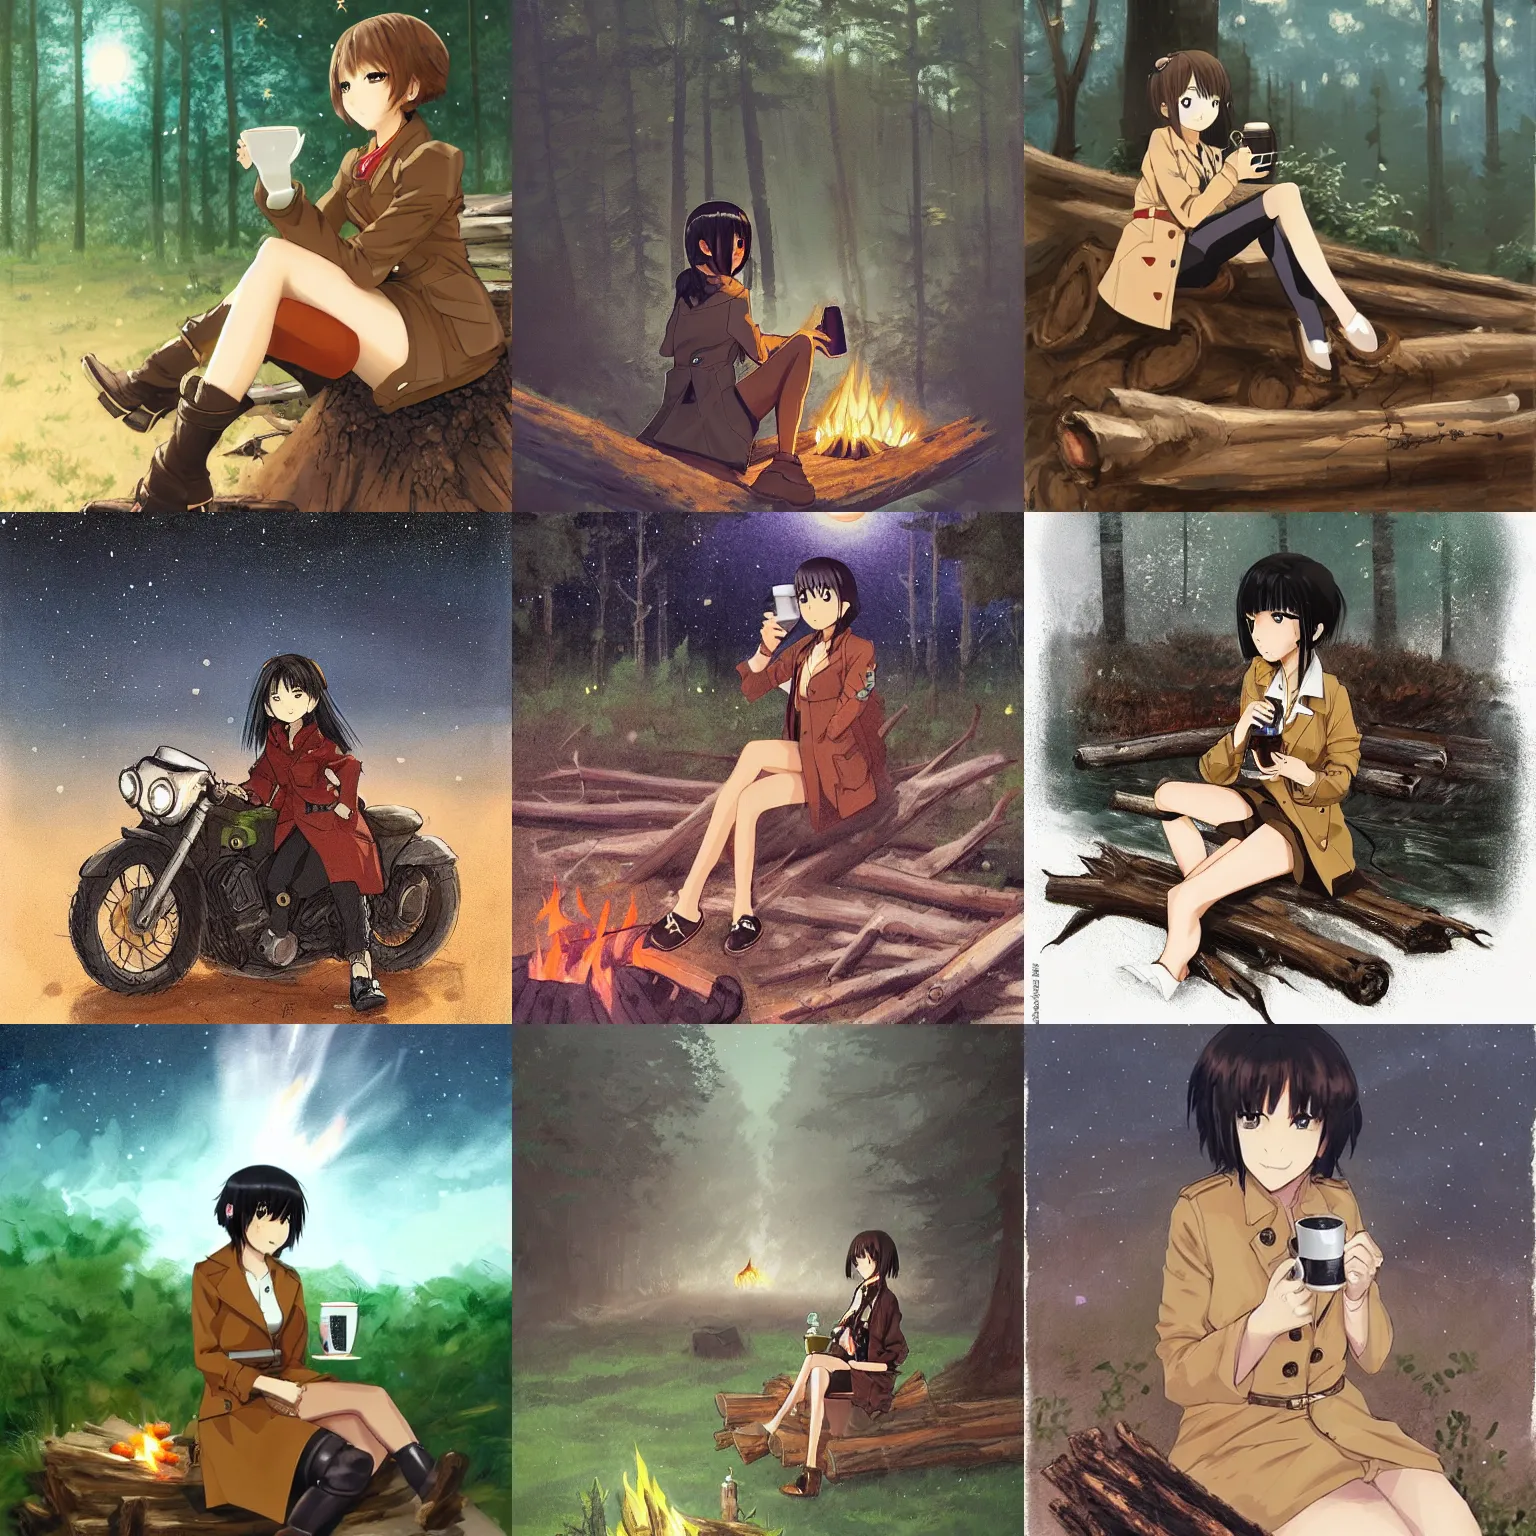 Prompt: An anime girl with short black hair and green eyes in a tan trenchcoat sitting on a log and drinking tea by the campfire by her motorcycle at night under the stars in the style of Jakub Rozalski